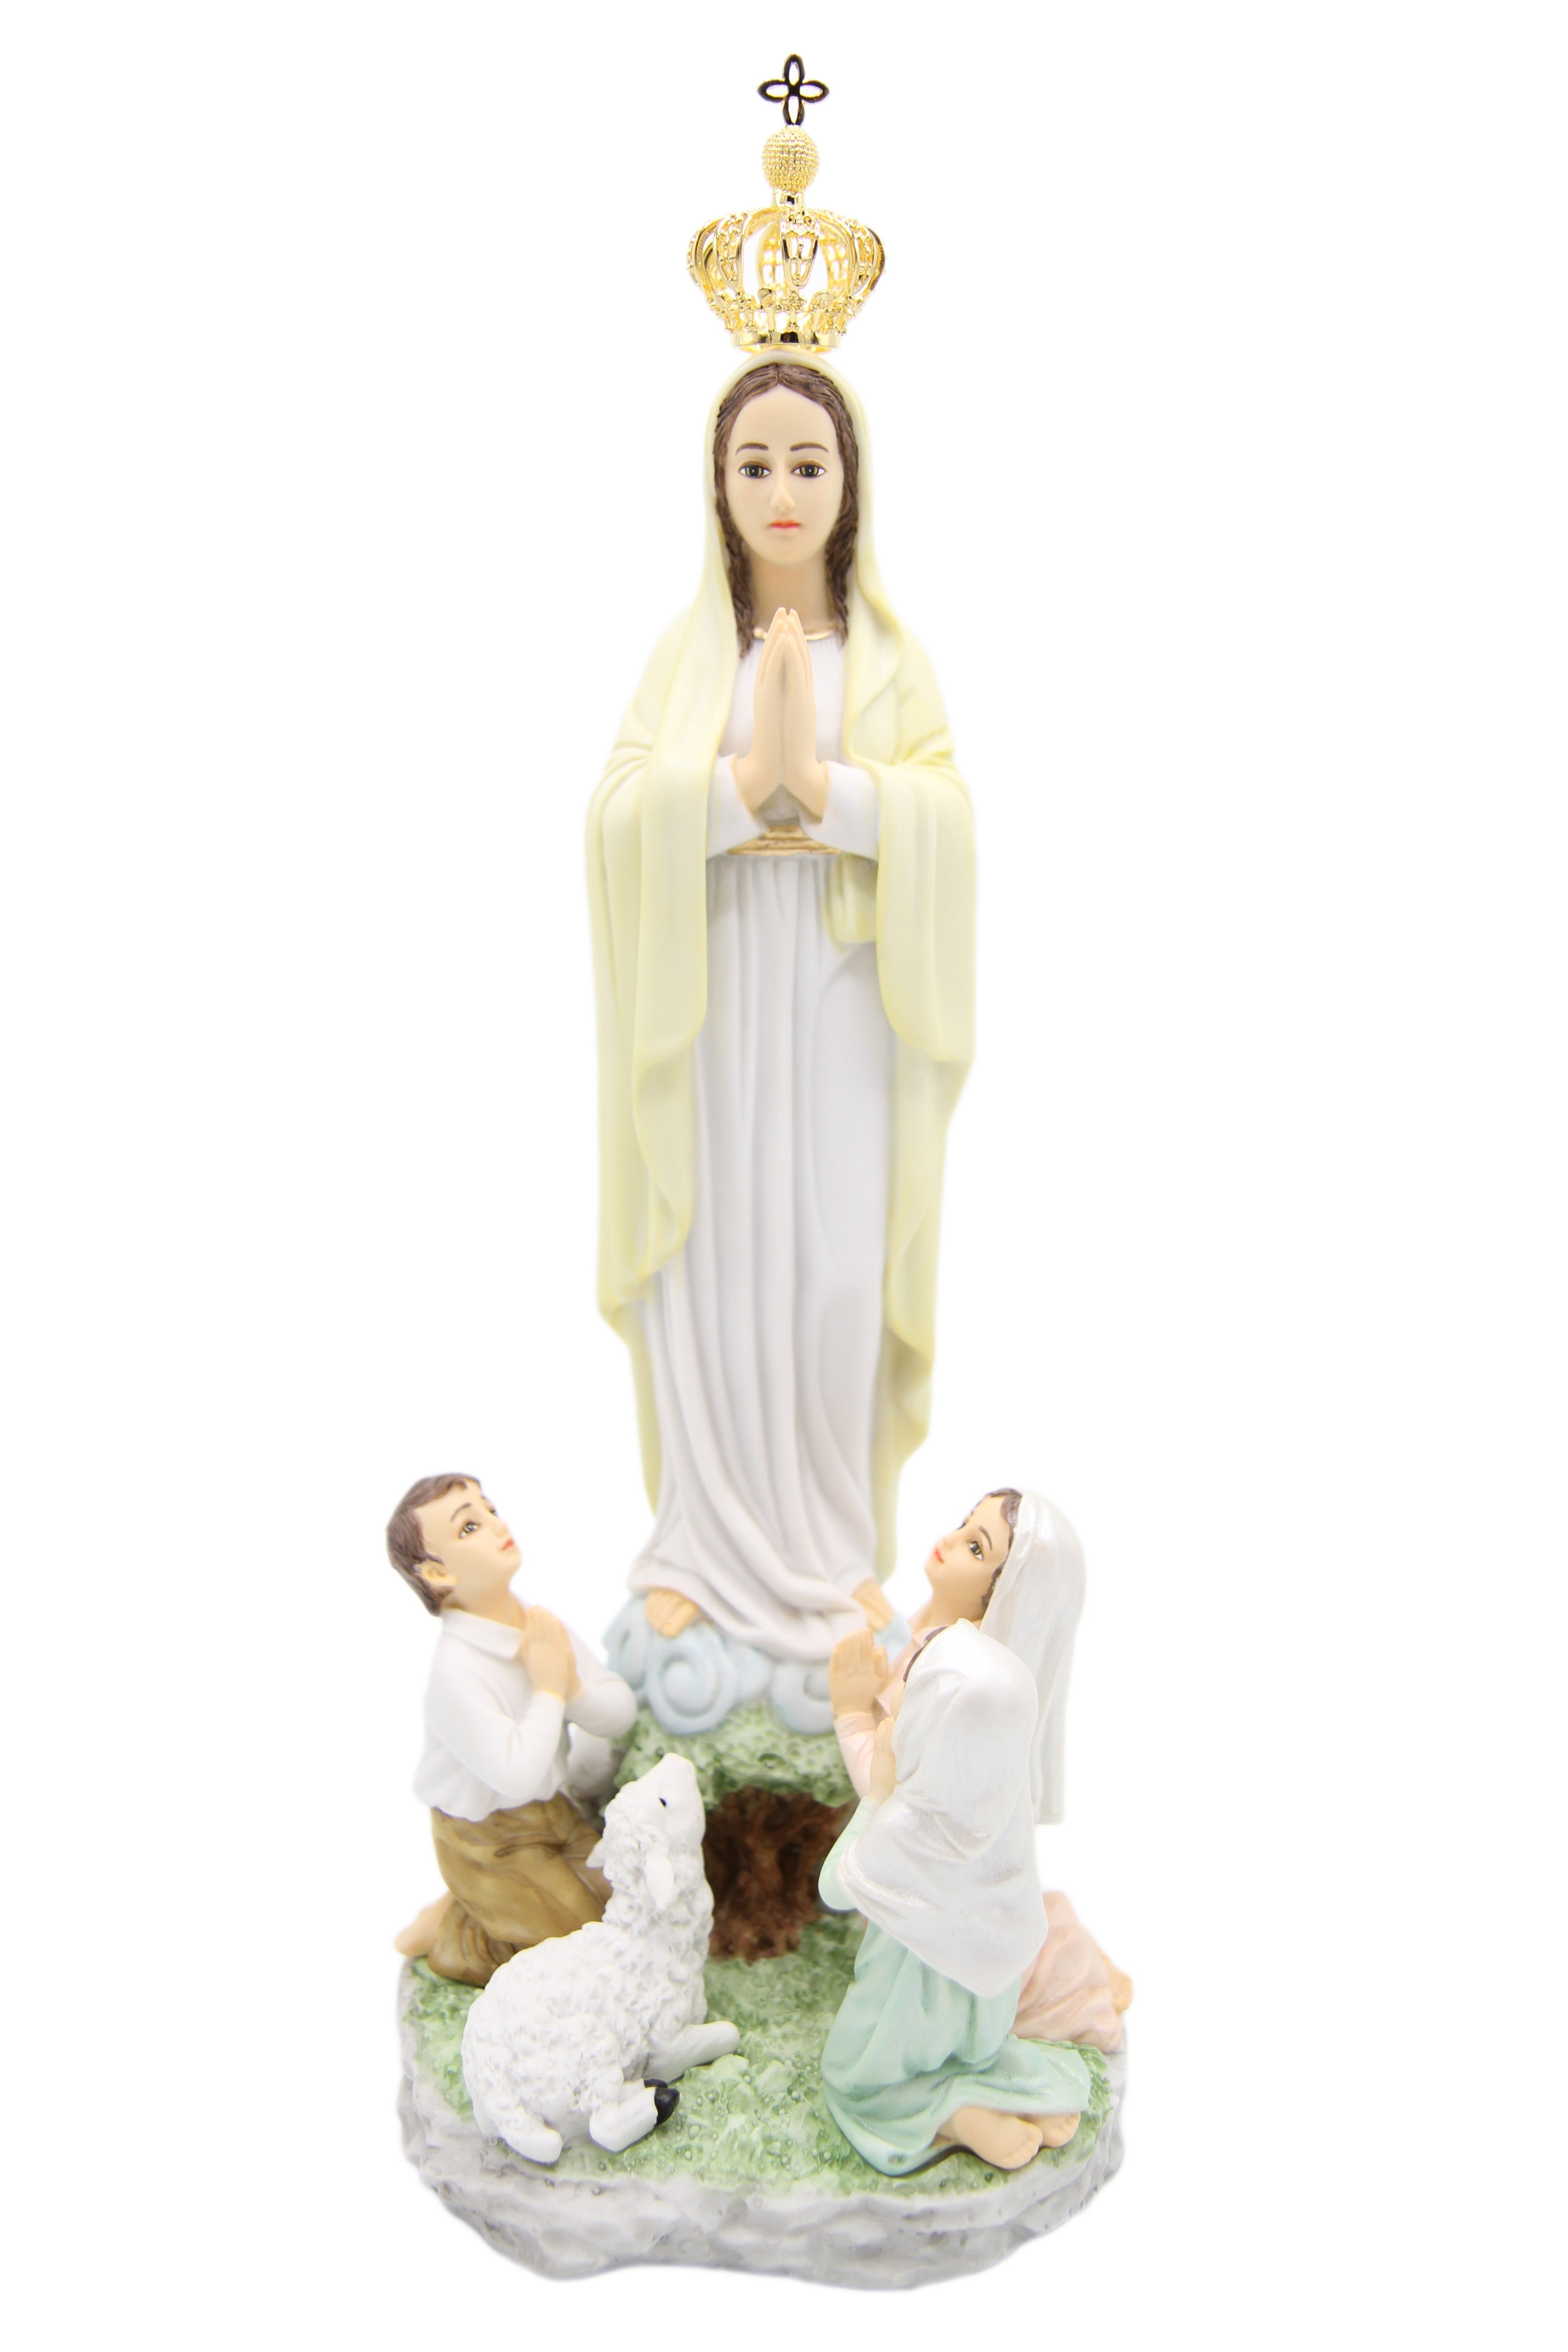 14 Inch Our Lady of Fatima with Shepherd Children Statue Metal Crown VIttoria Collection